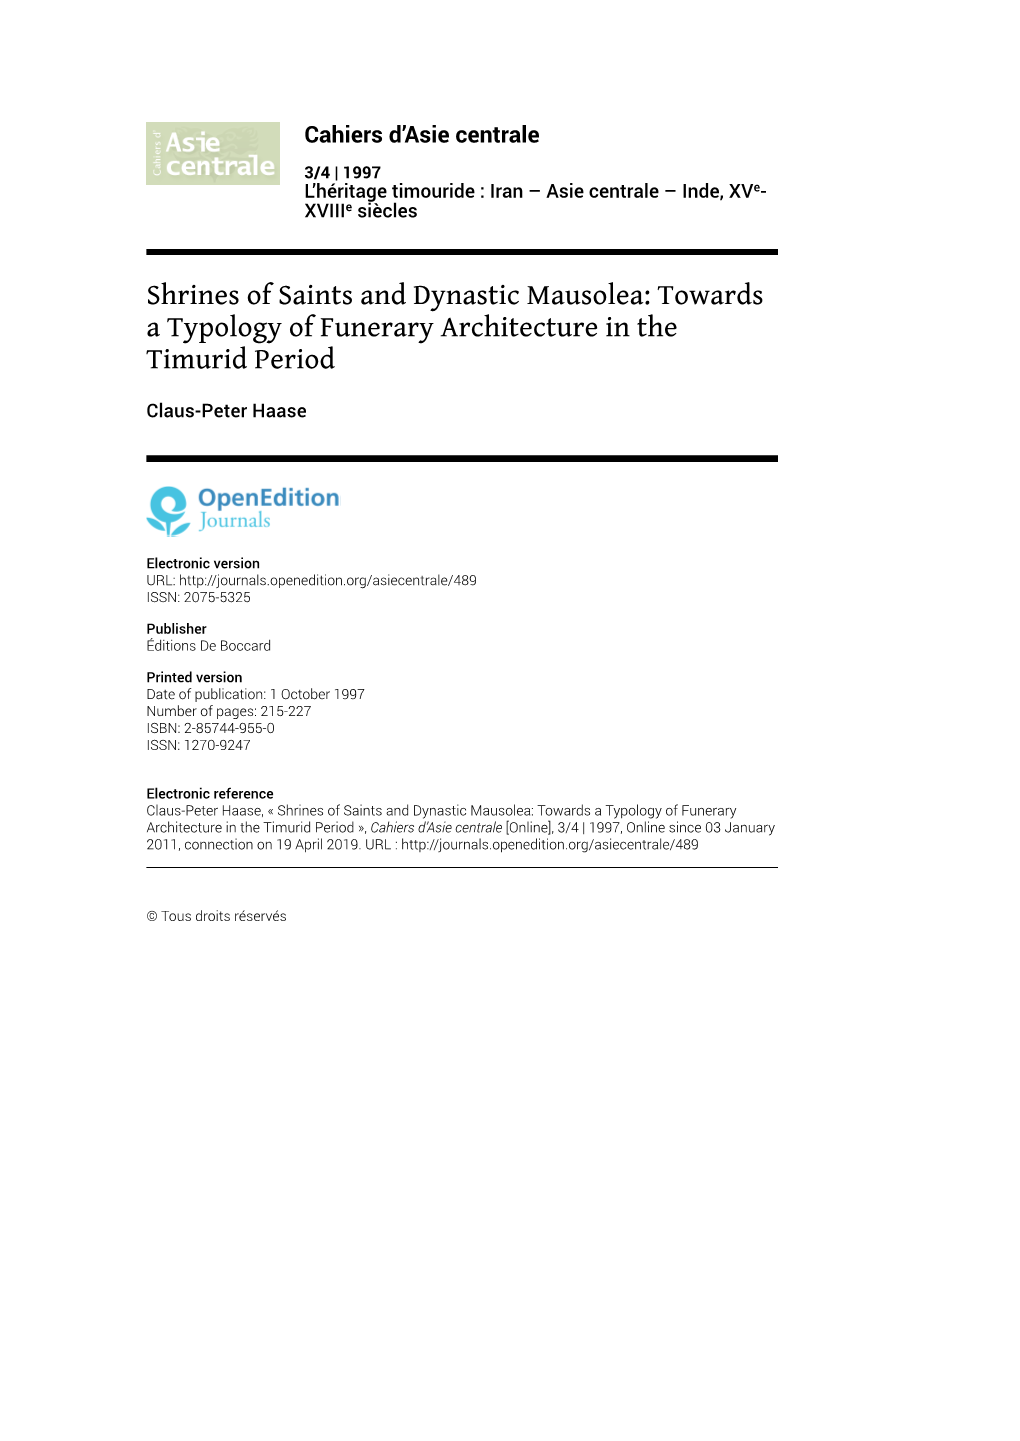 Shrines of Saints and Dynastic Mausolea: Towards a Typology of Funerary Architecture in the Timurid Period